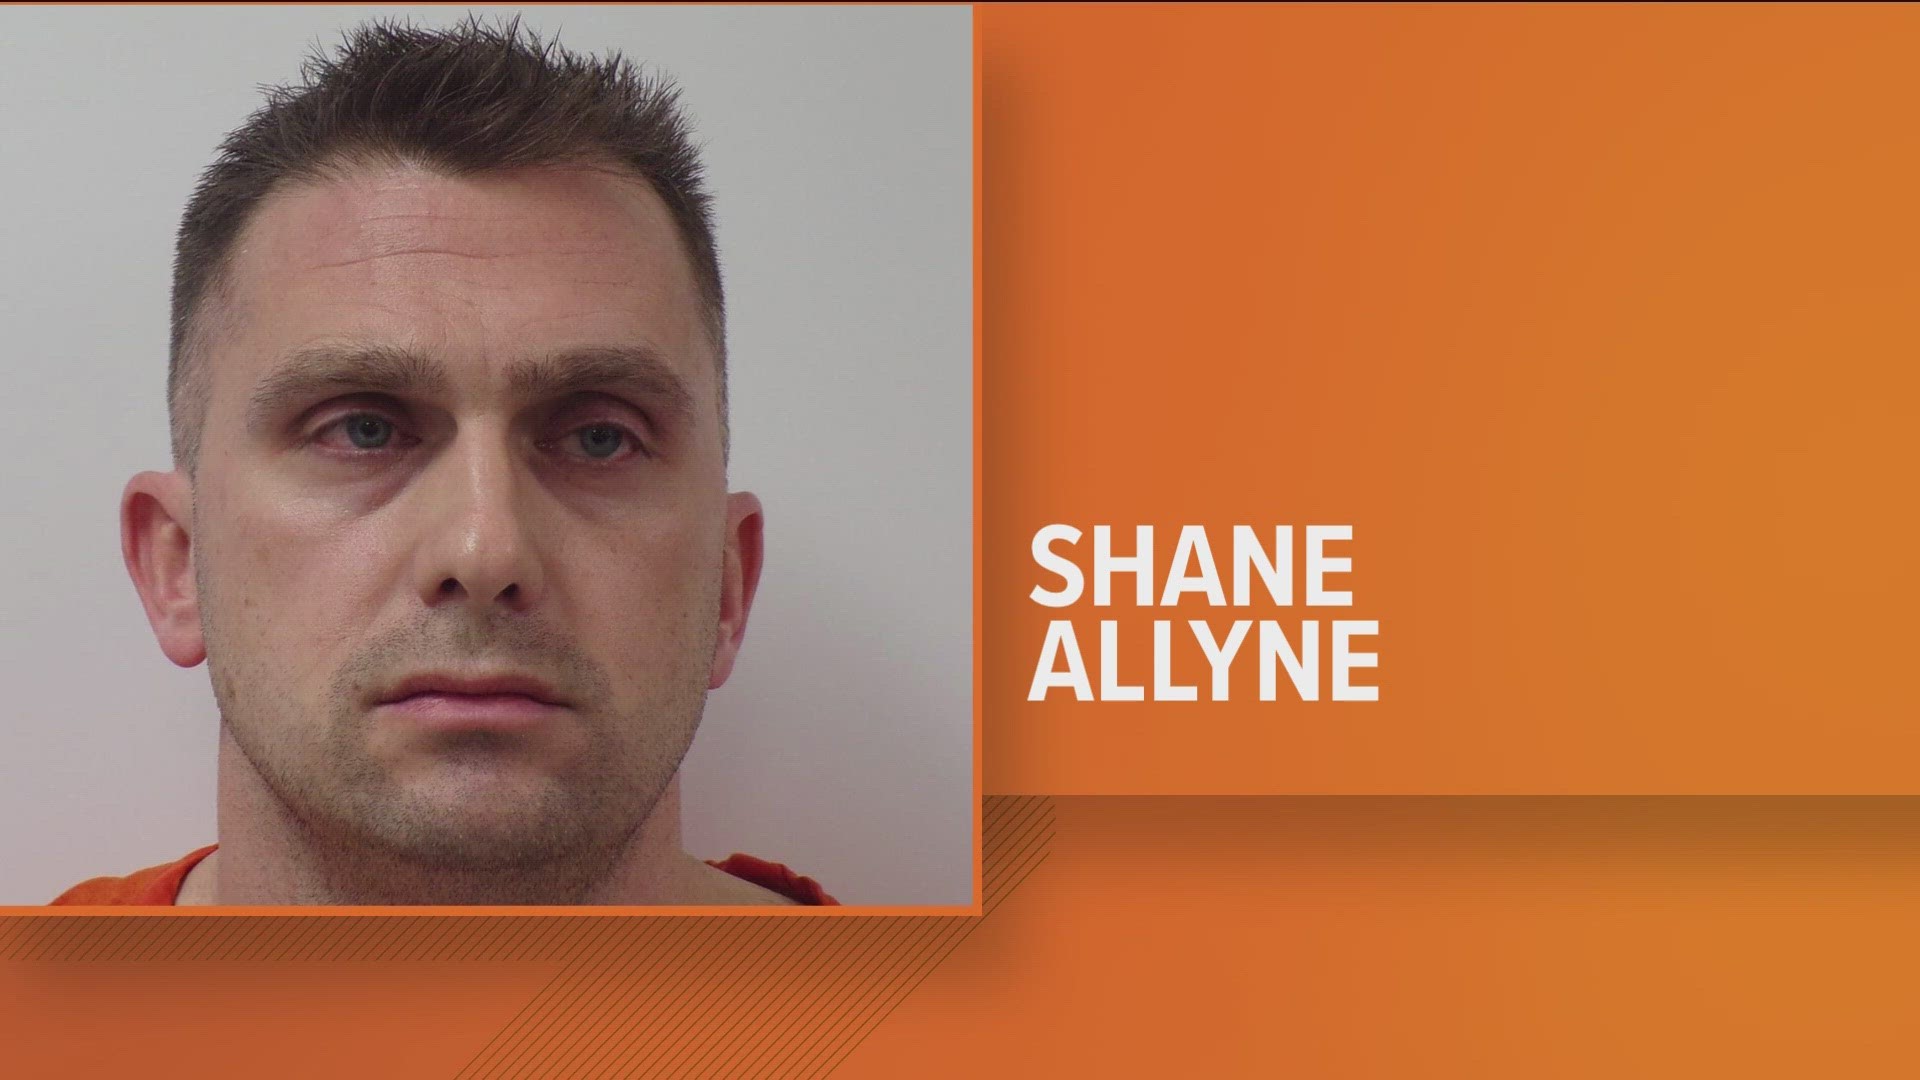 The 43-year-old man traveled from Nashville to Tiffin and allegedly said he would pay a minor to engage in sexual conduct with him at a hotel, according to police.